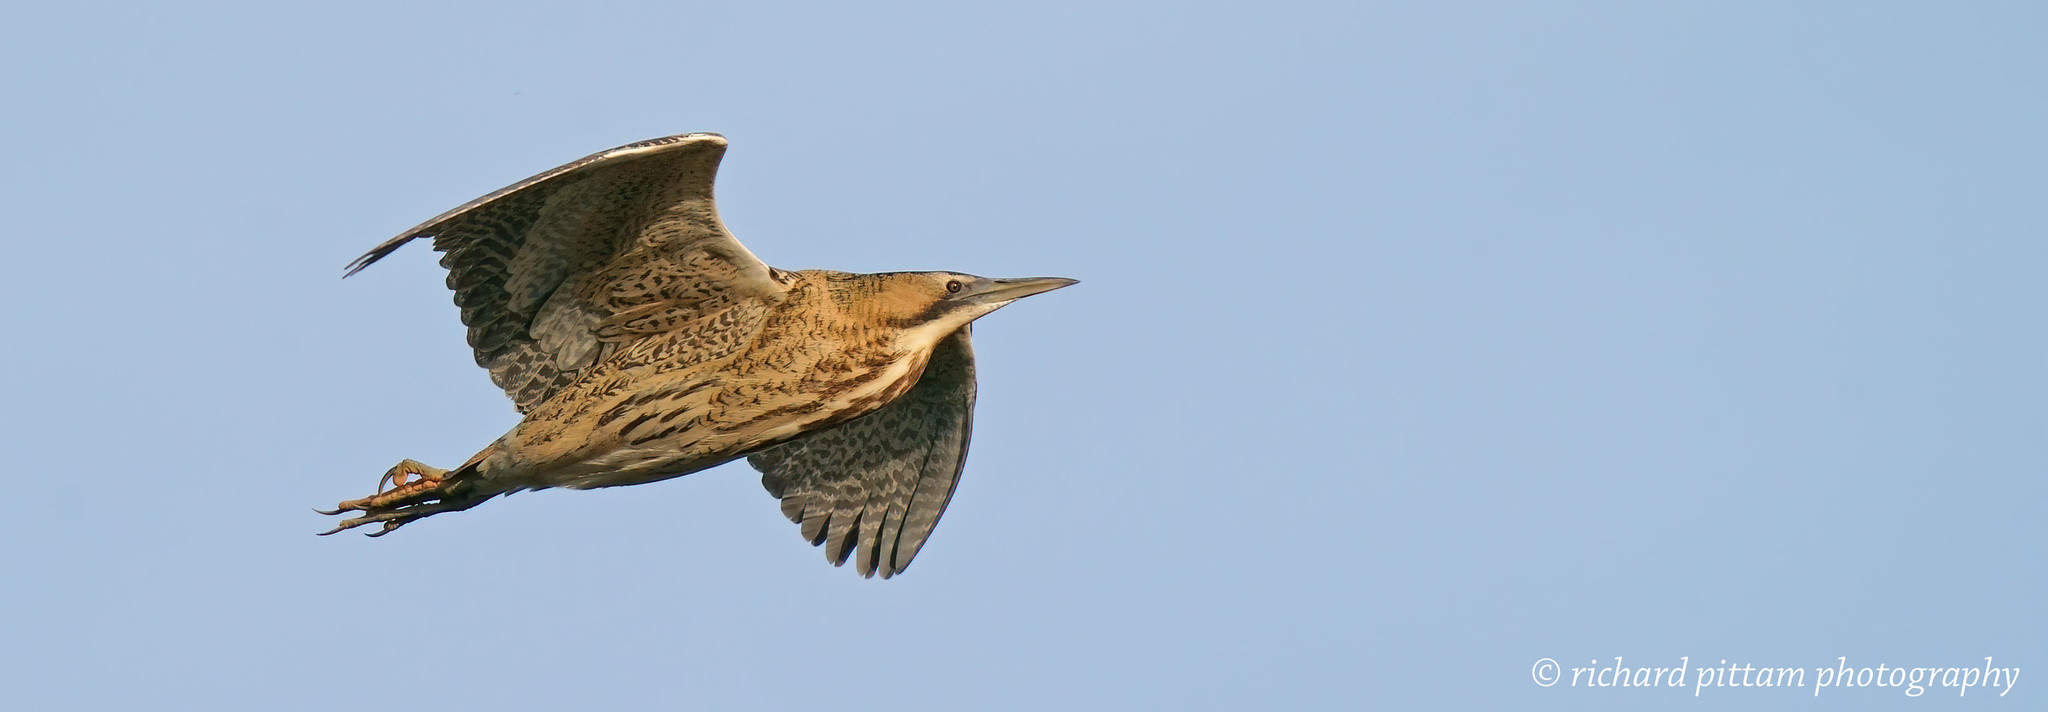 Bittern - I had a lucky 10 seconds to snatch these chance shots